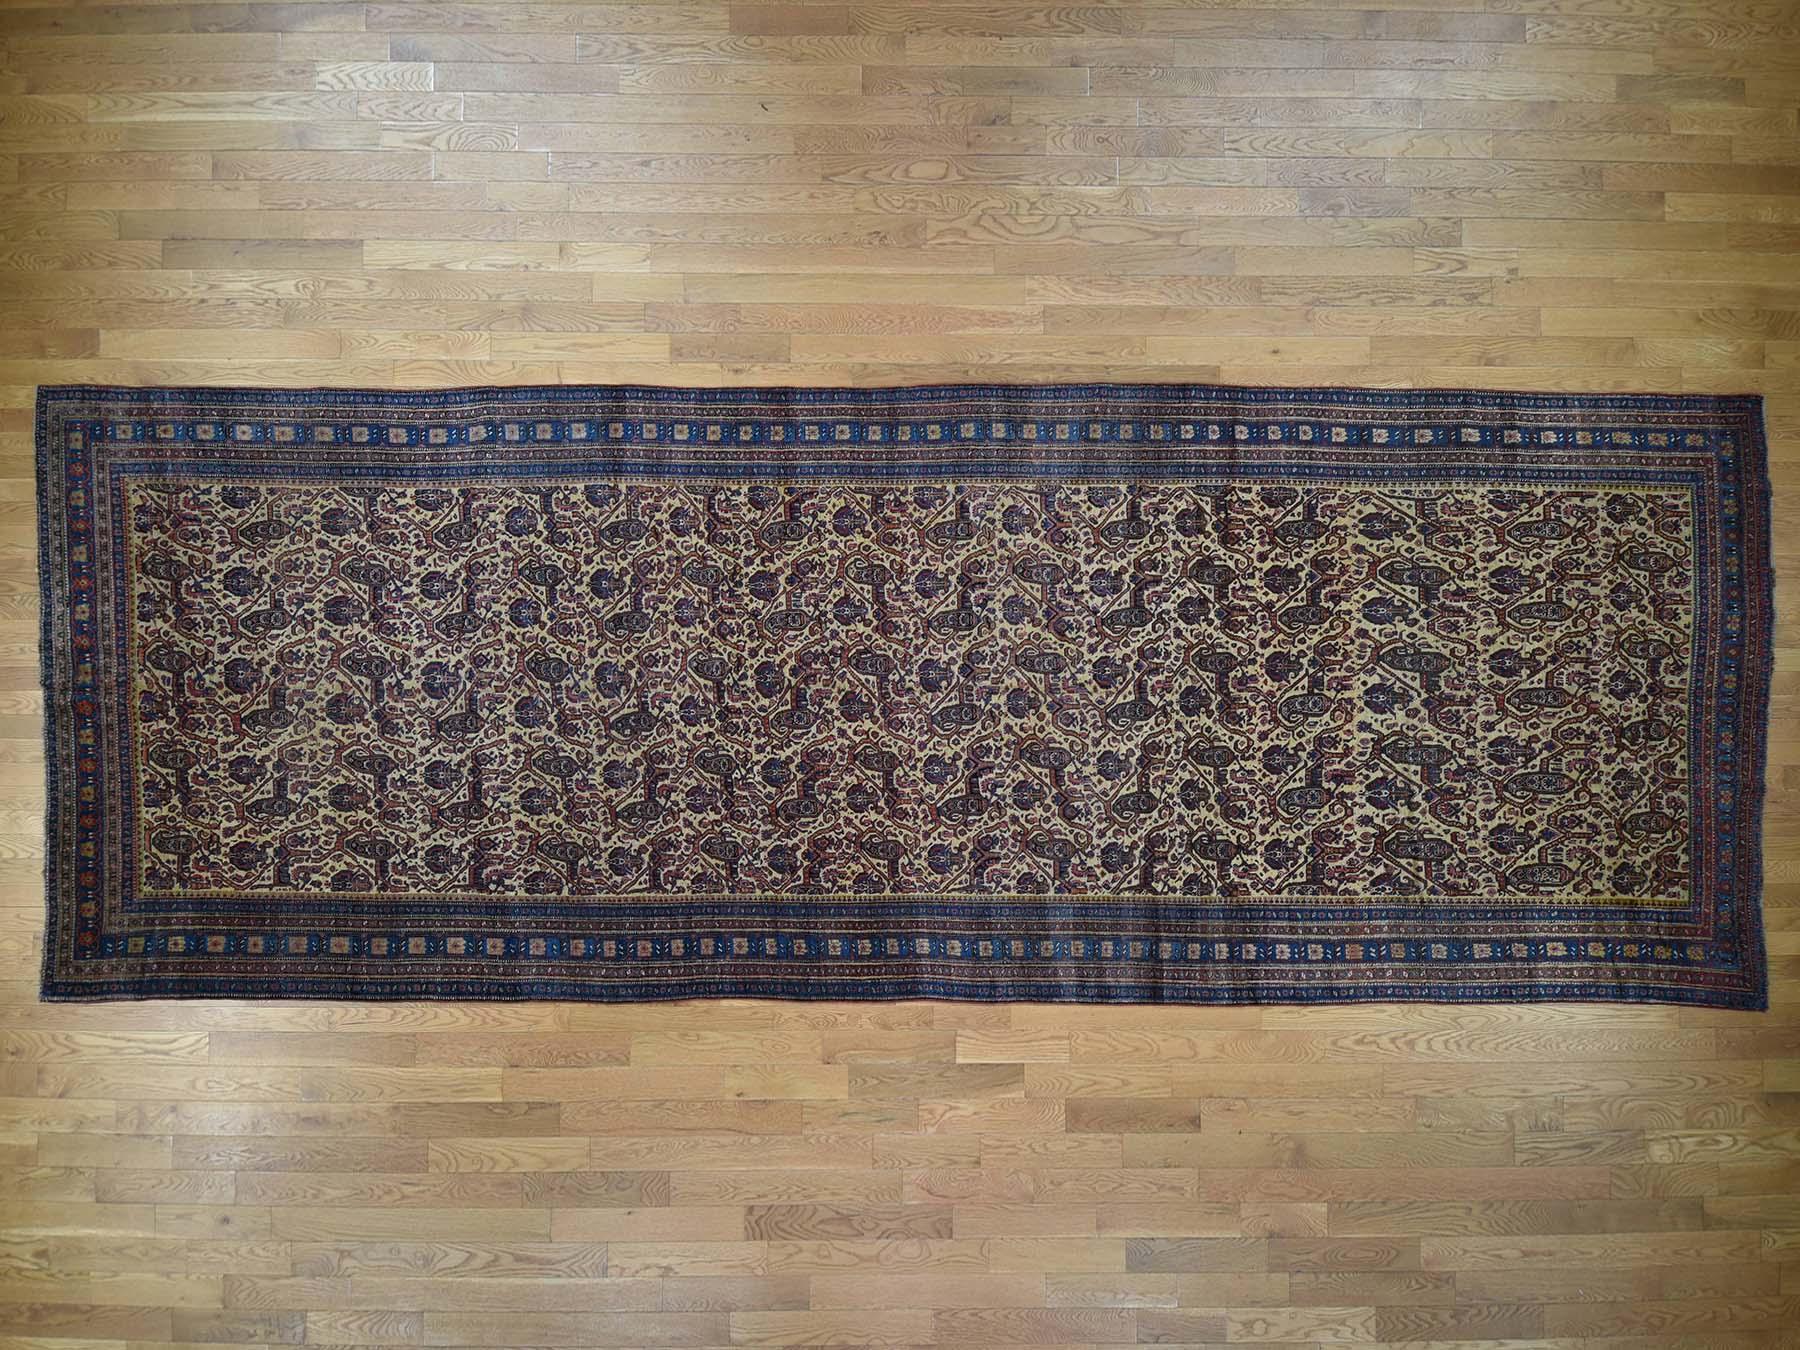 This is a genuine hand knotted oriental rug. It is not hand tufted or machine made rug. Our entire inventory is made of either hand-knotted or hand-woven rugs.

Decorate your home with this high quality hand knotted yellow antique bidjar, is an